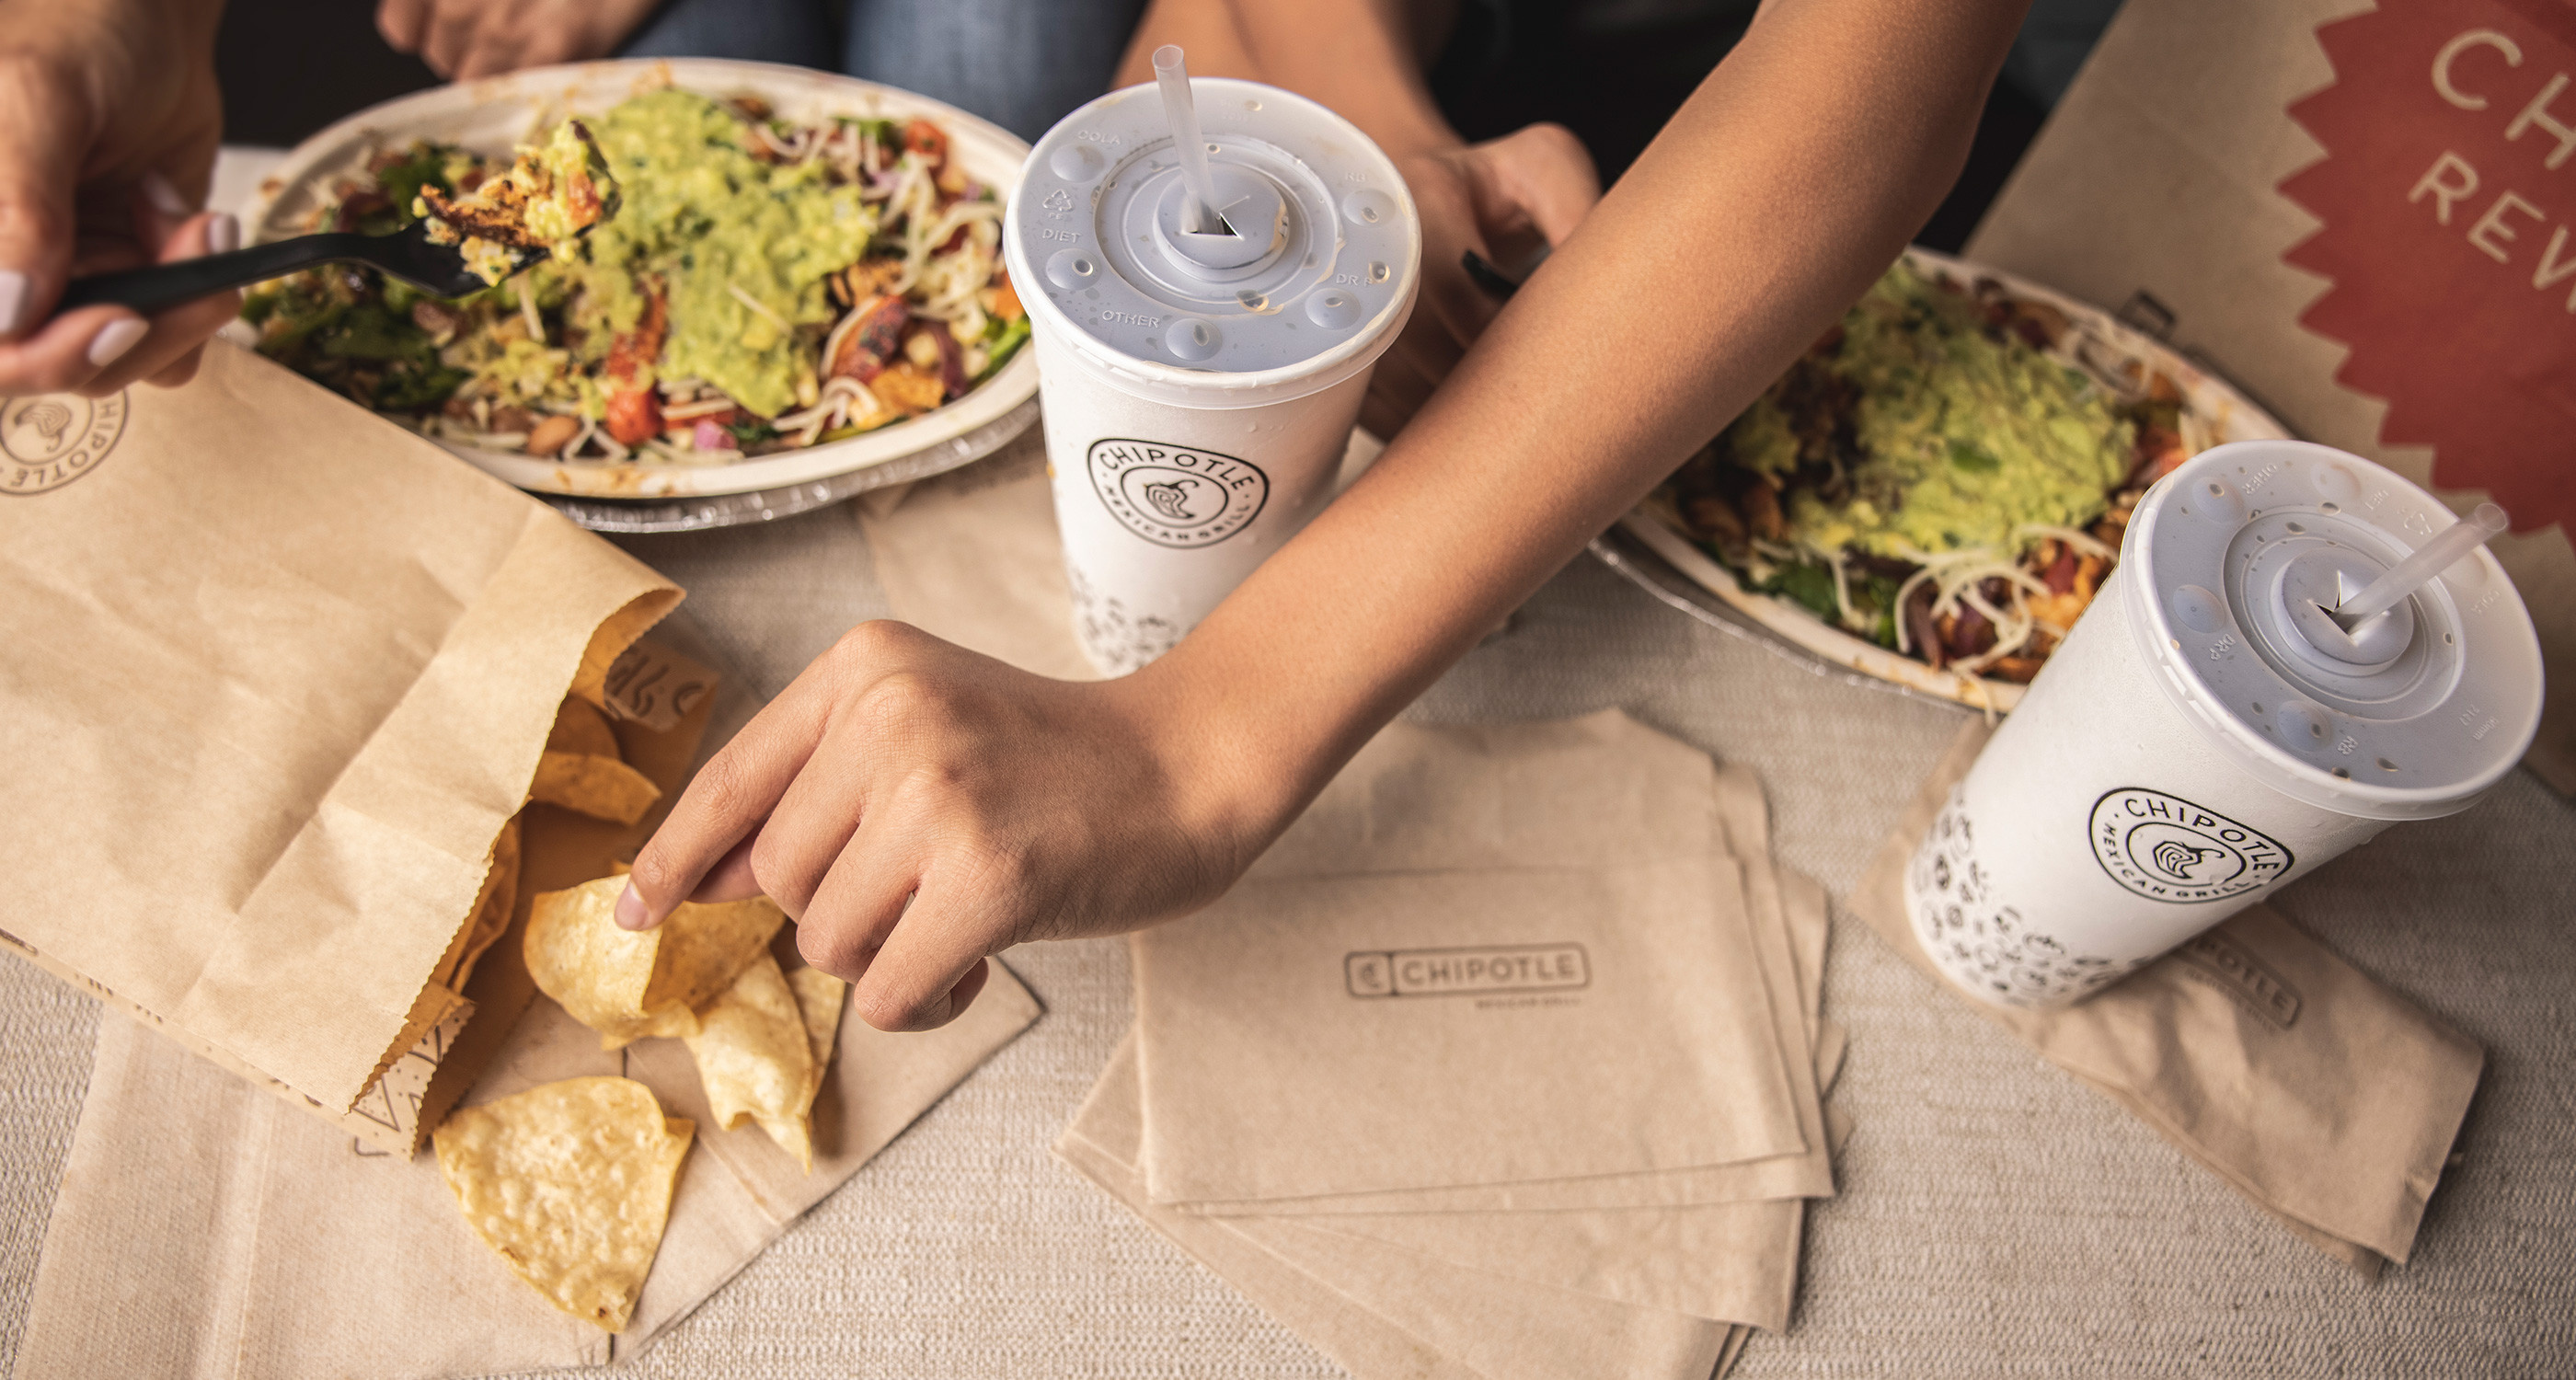 Chipotle: Fresh Mexican food restaurants throughout the U.S., Tortilla chips, Sodas, Fruit and tea drinks. 2800x1500 HD Background.